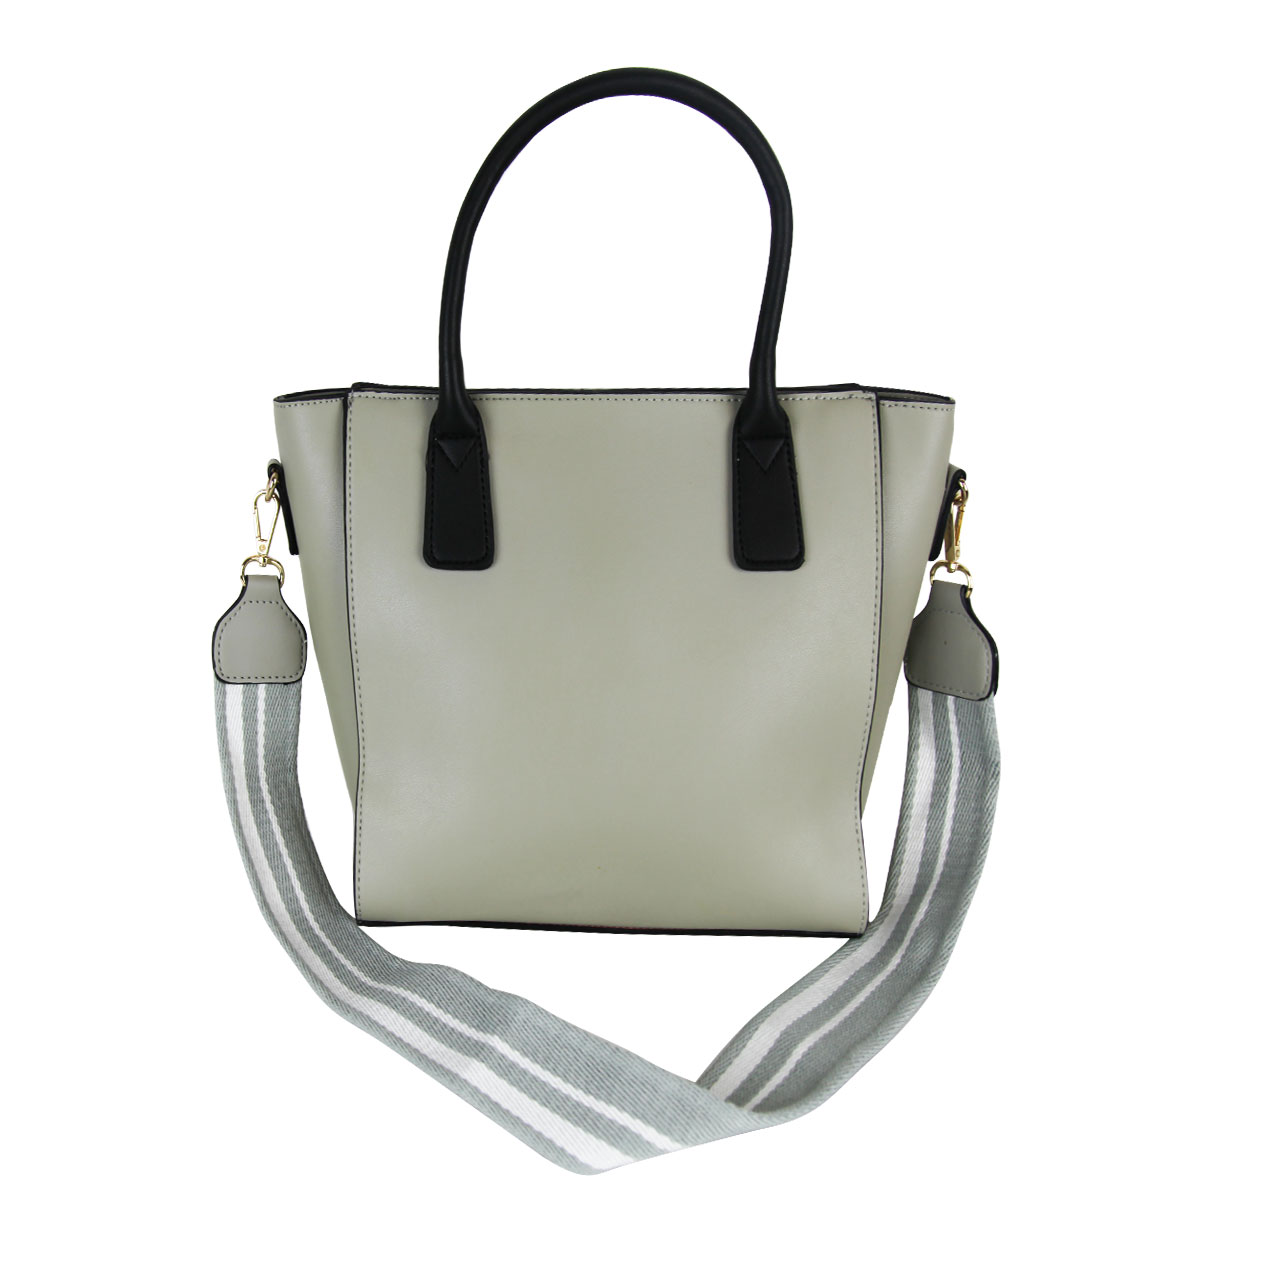 Brown/Gray PU Leather Shoulder Bag For Women